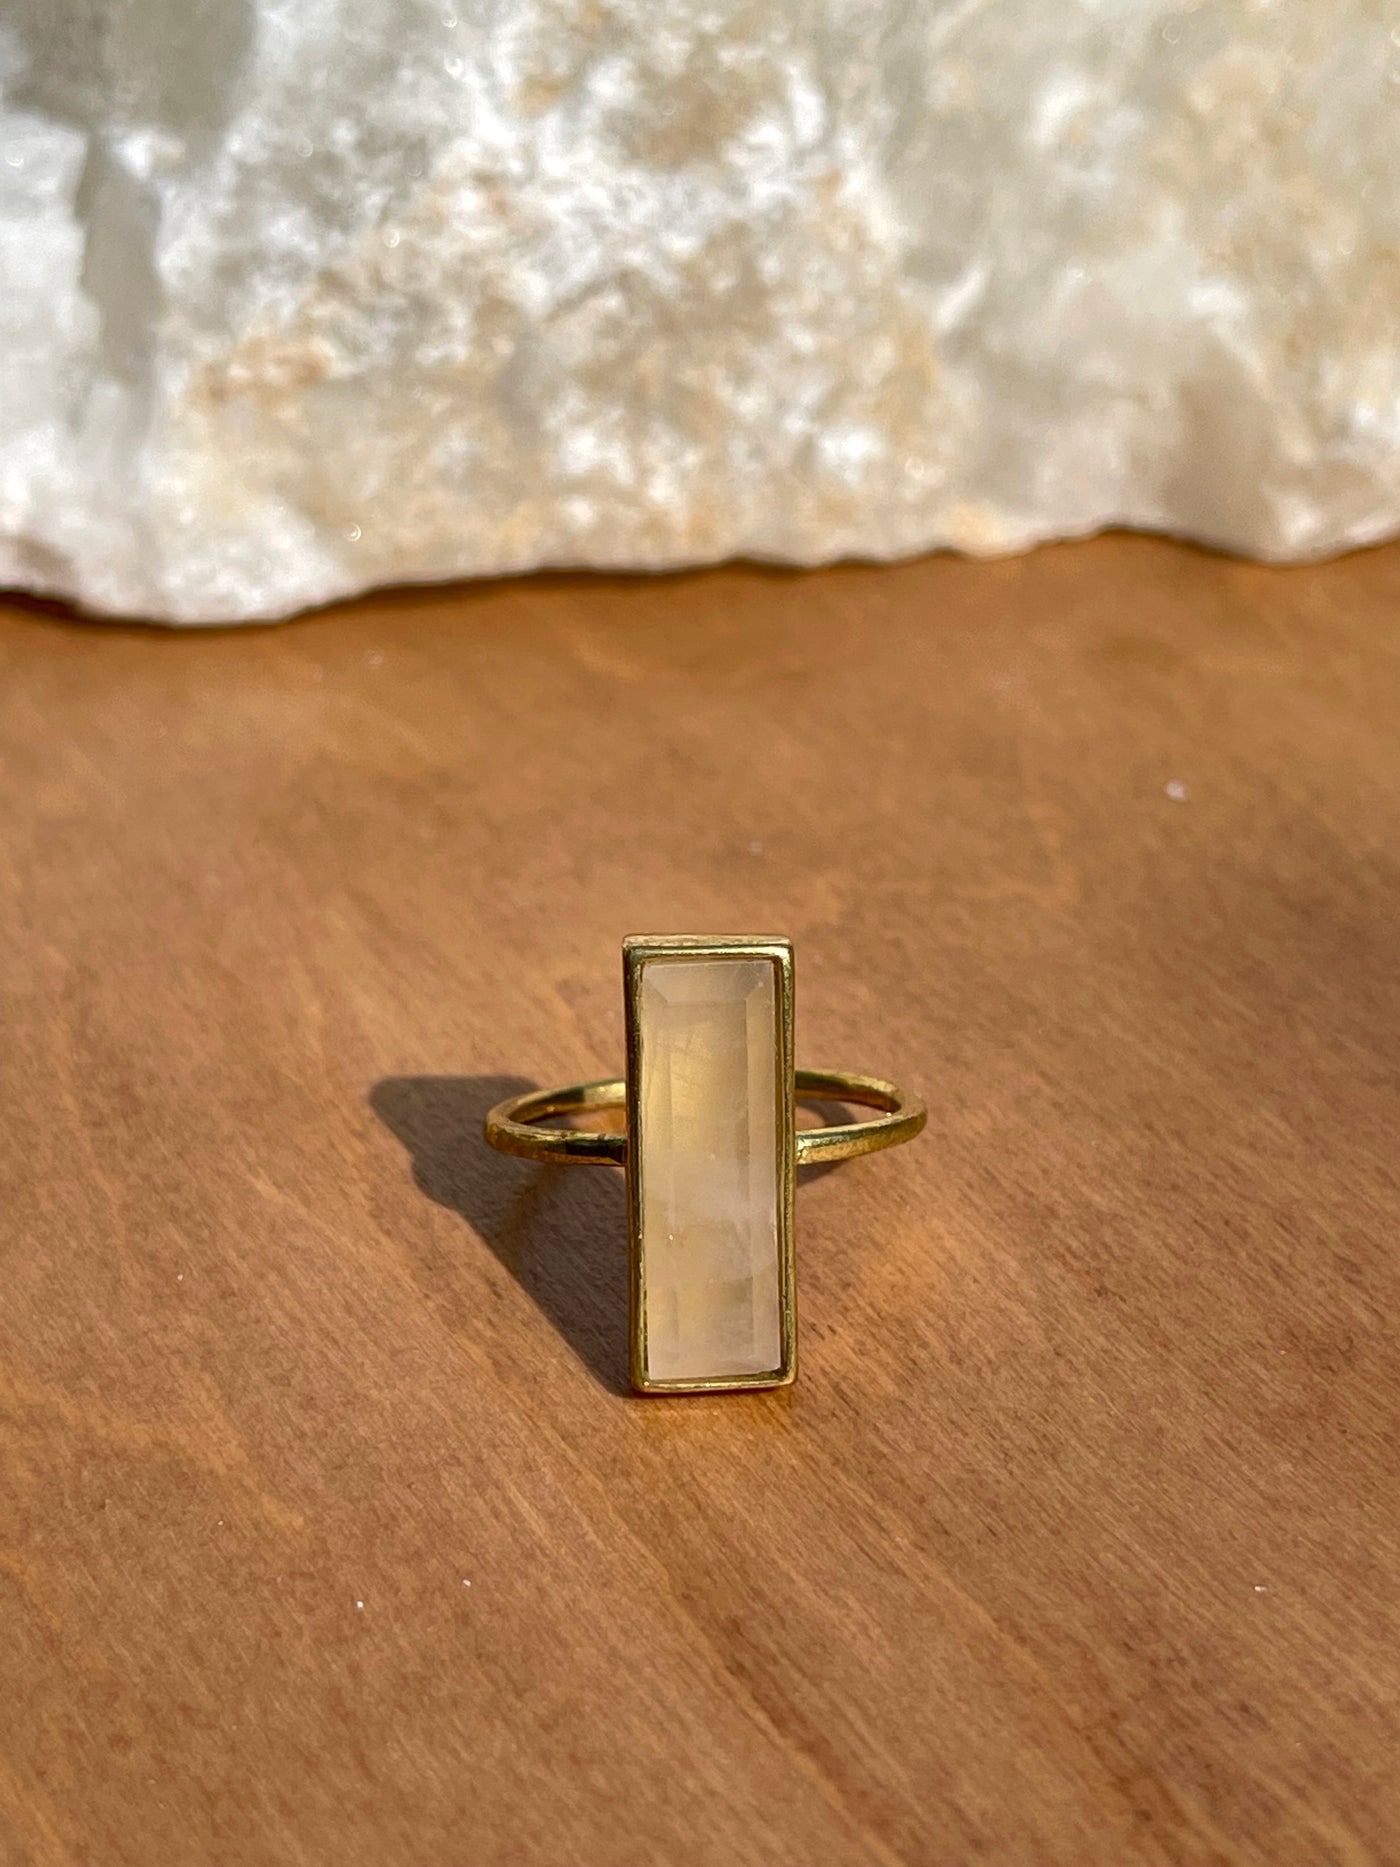 ROSE QUARTZ GEM BAR RING is bezel-set in a recycled brass band with 24K gold overlay. Size 7.